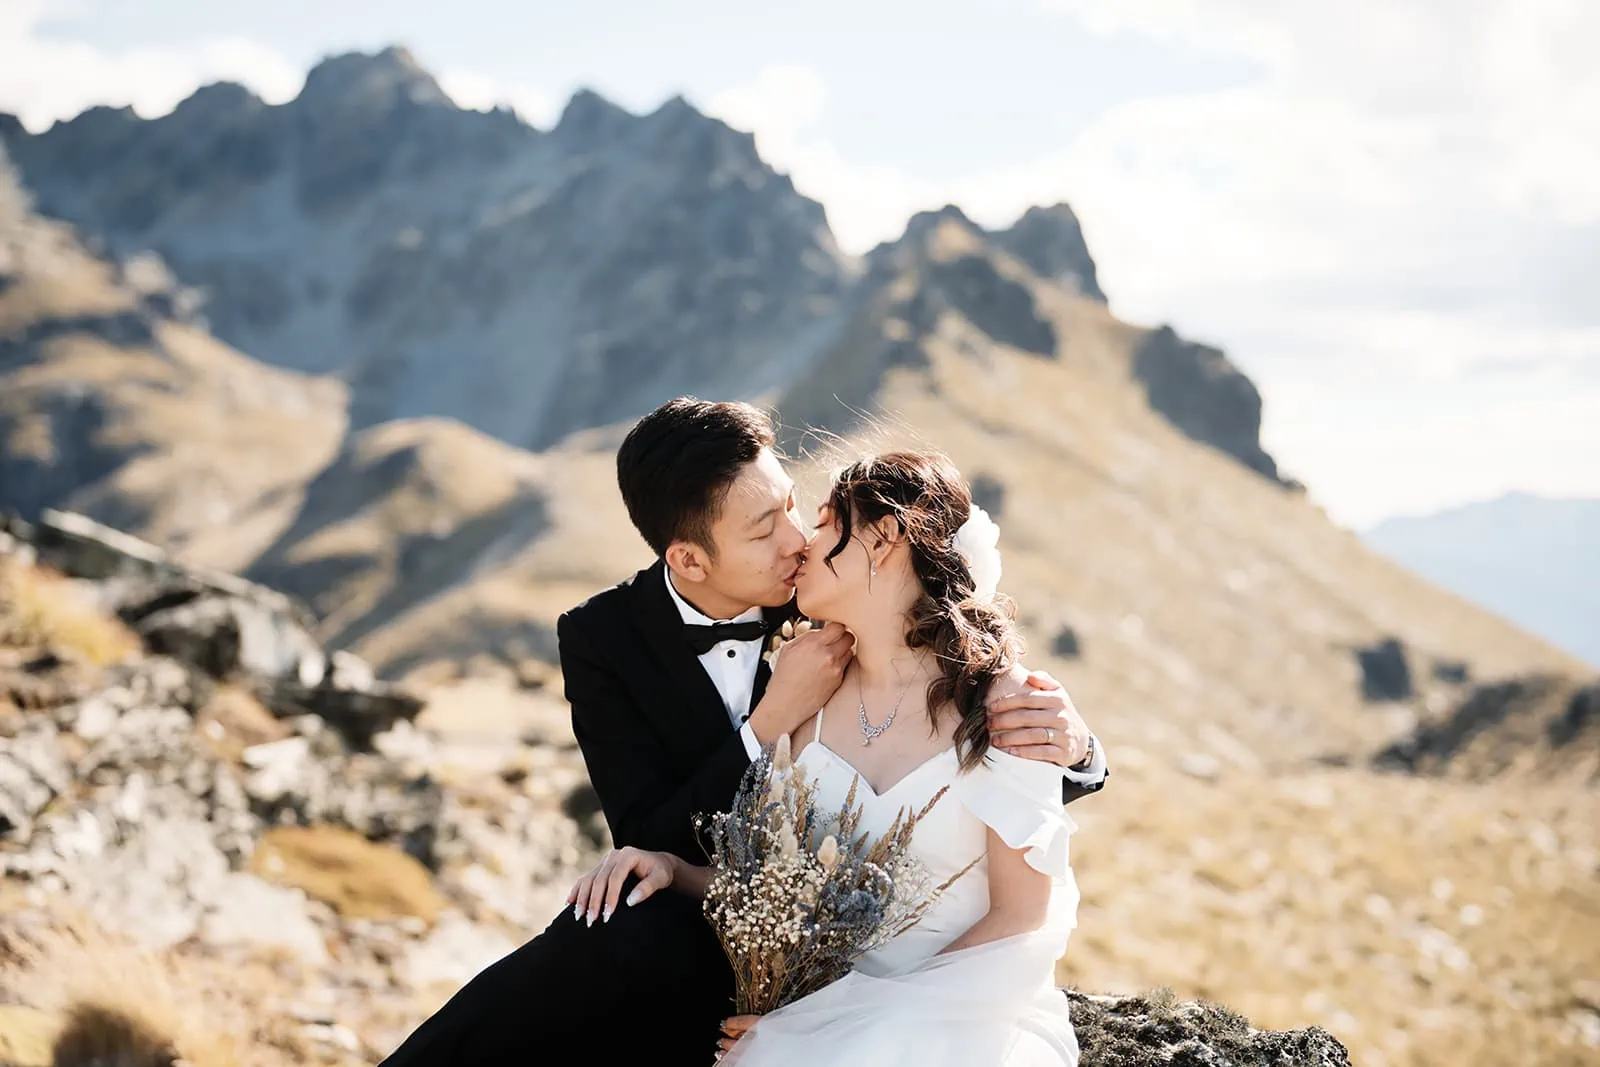 Dios and Carlyn, a bride and groom, share a passionate kiss atop Cecil Peak during their Queenstown heli pre-wedding photoshoot in New Zealand.